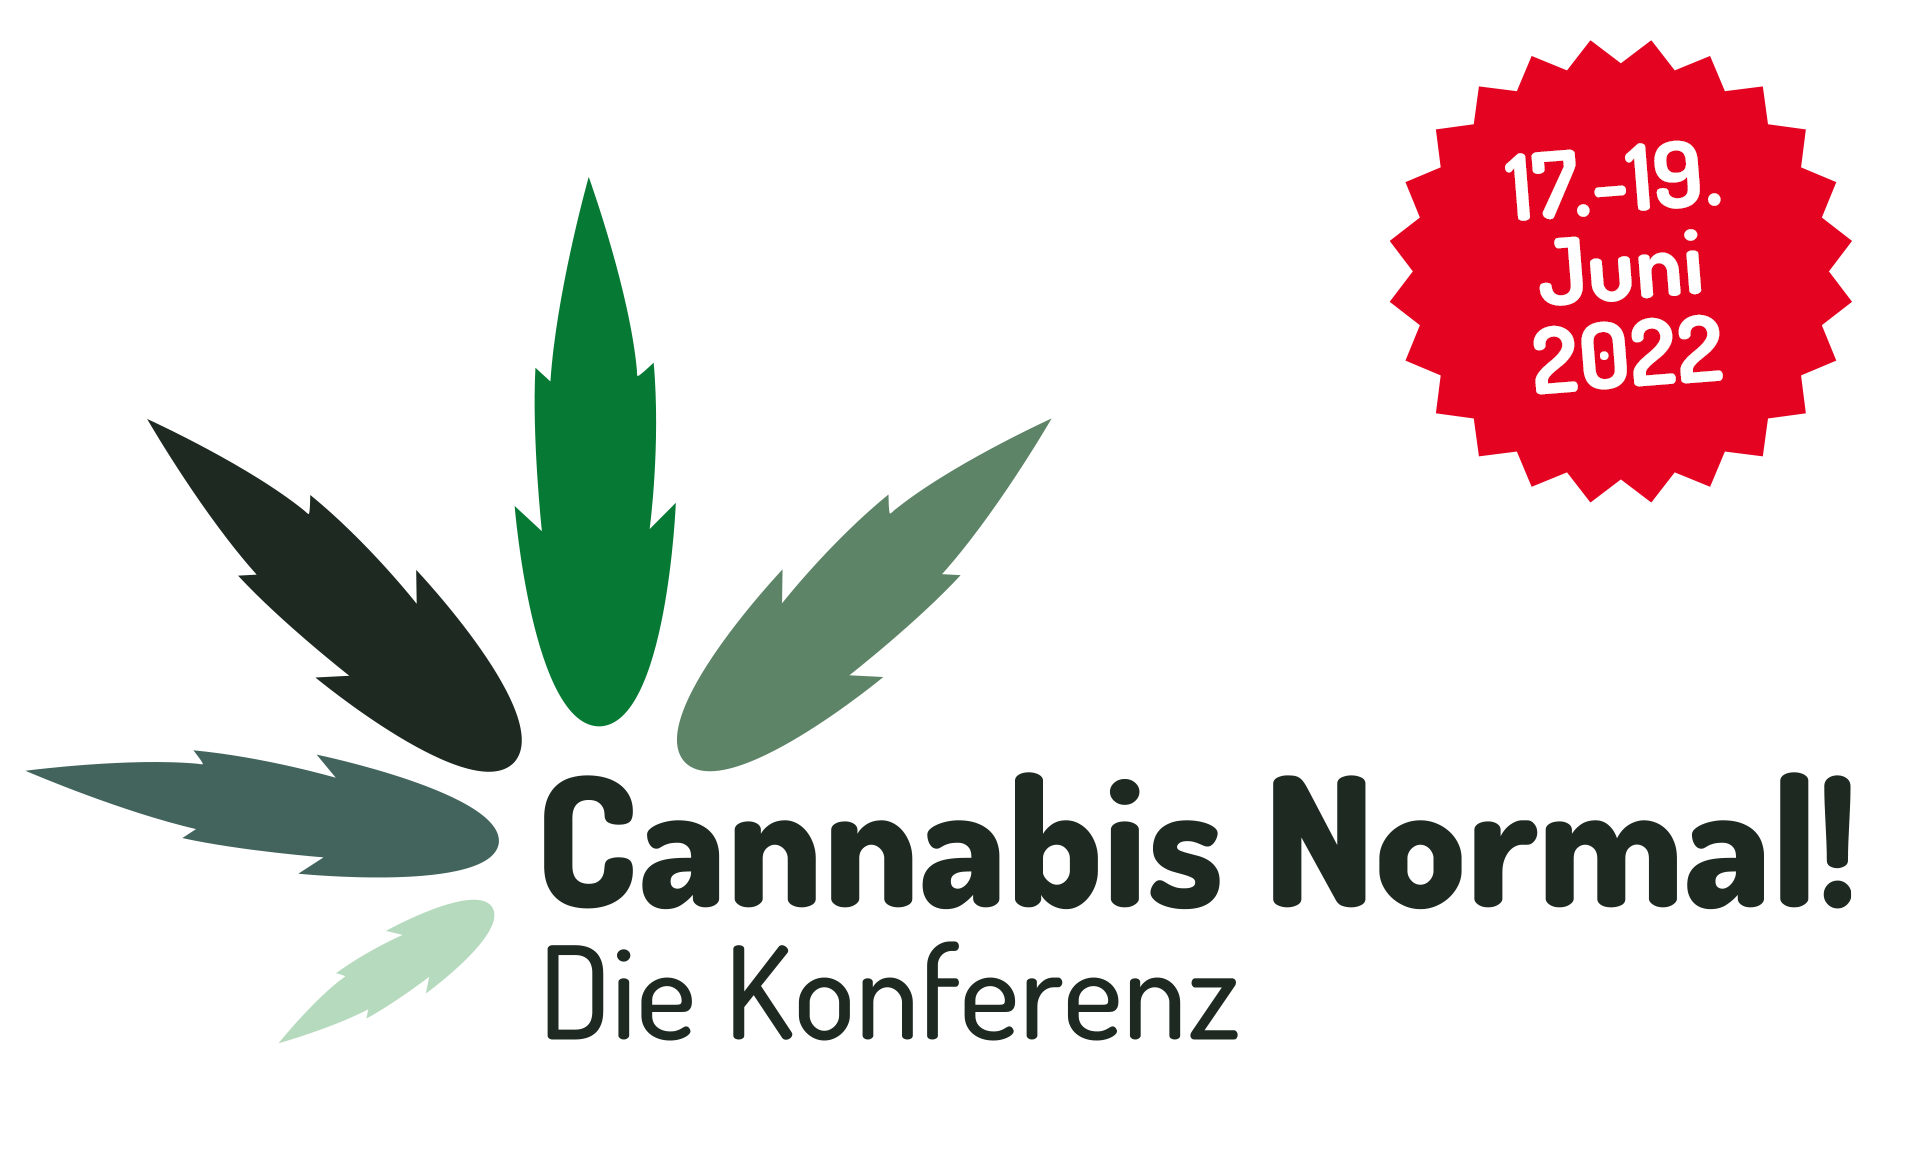 Save the date – Cannabis Normal! Konferenz 2022